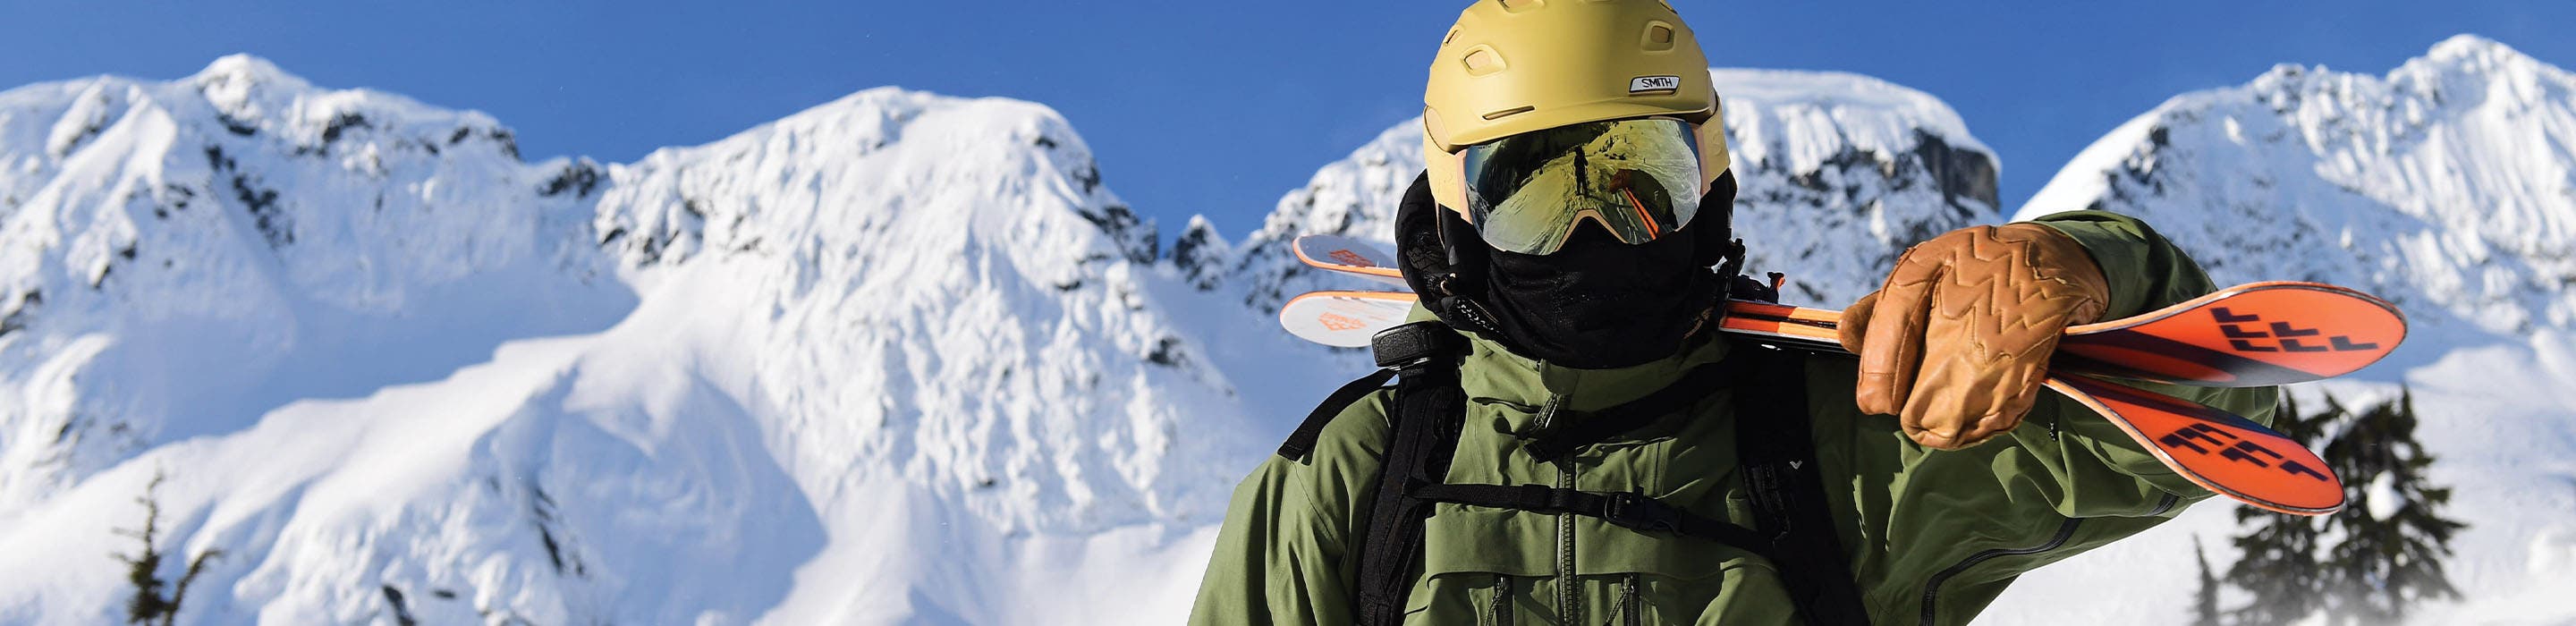 A man wearing OTG goggles poses for the camera with his skis over his shoulder with snowy mountains in the background.